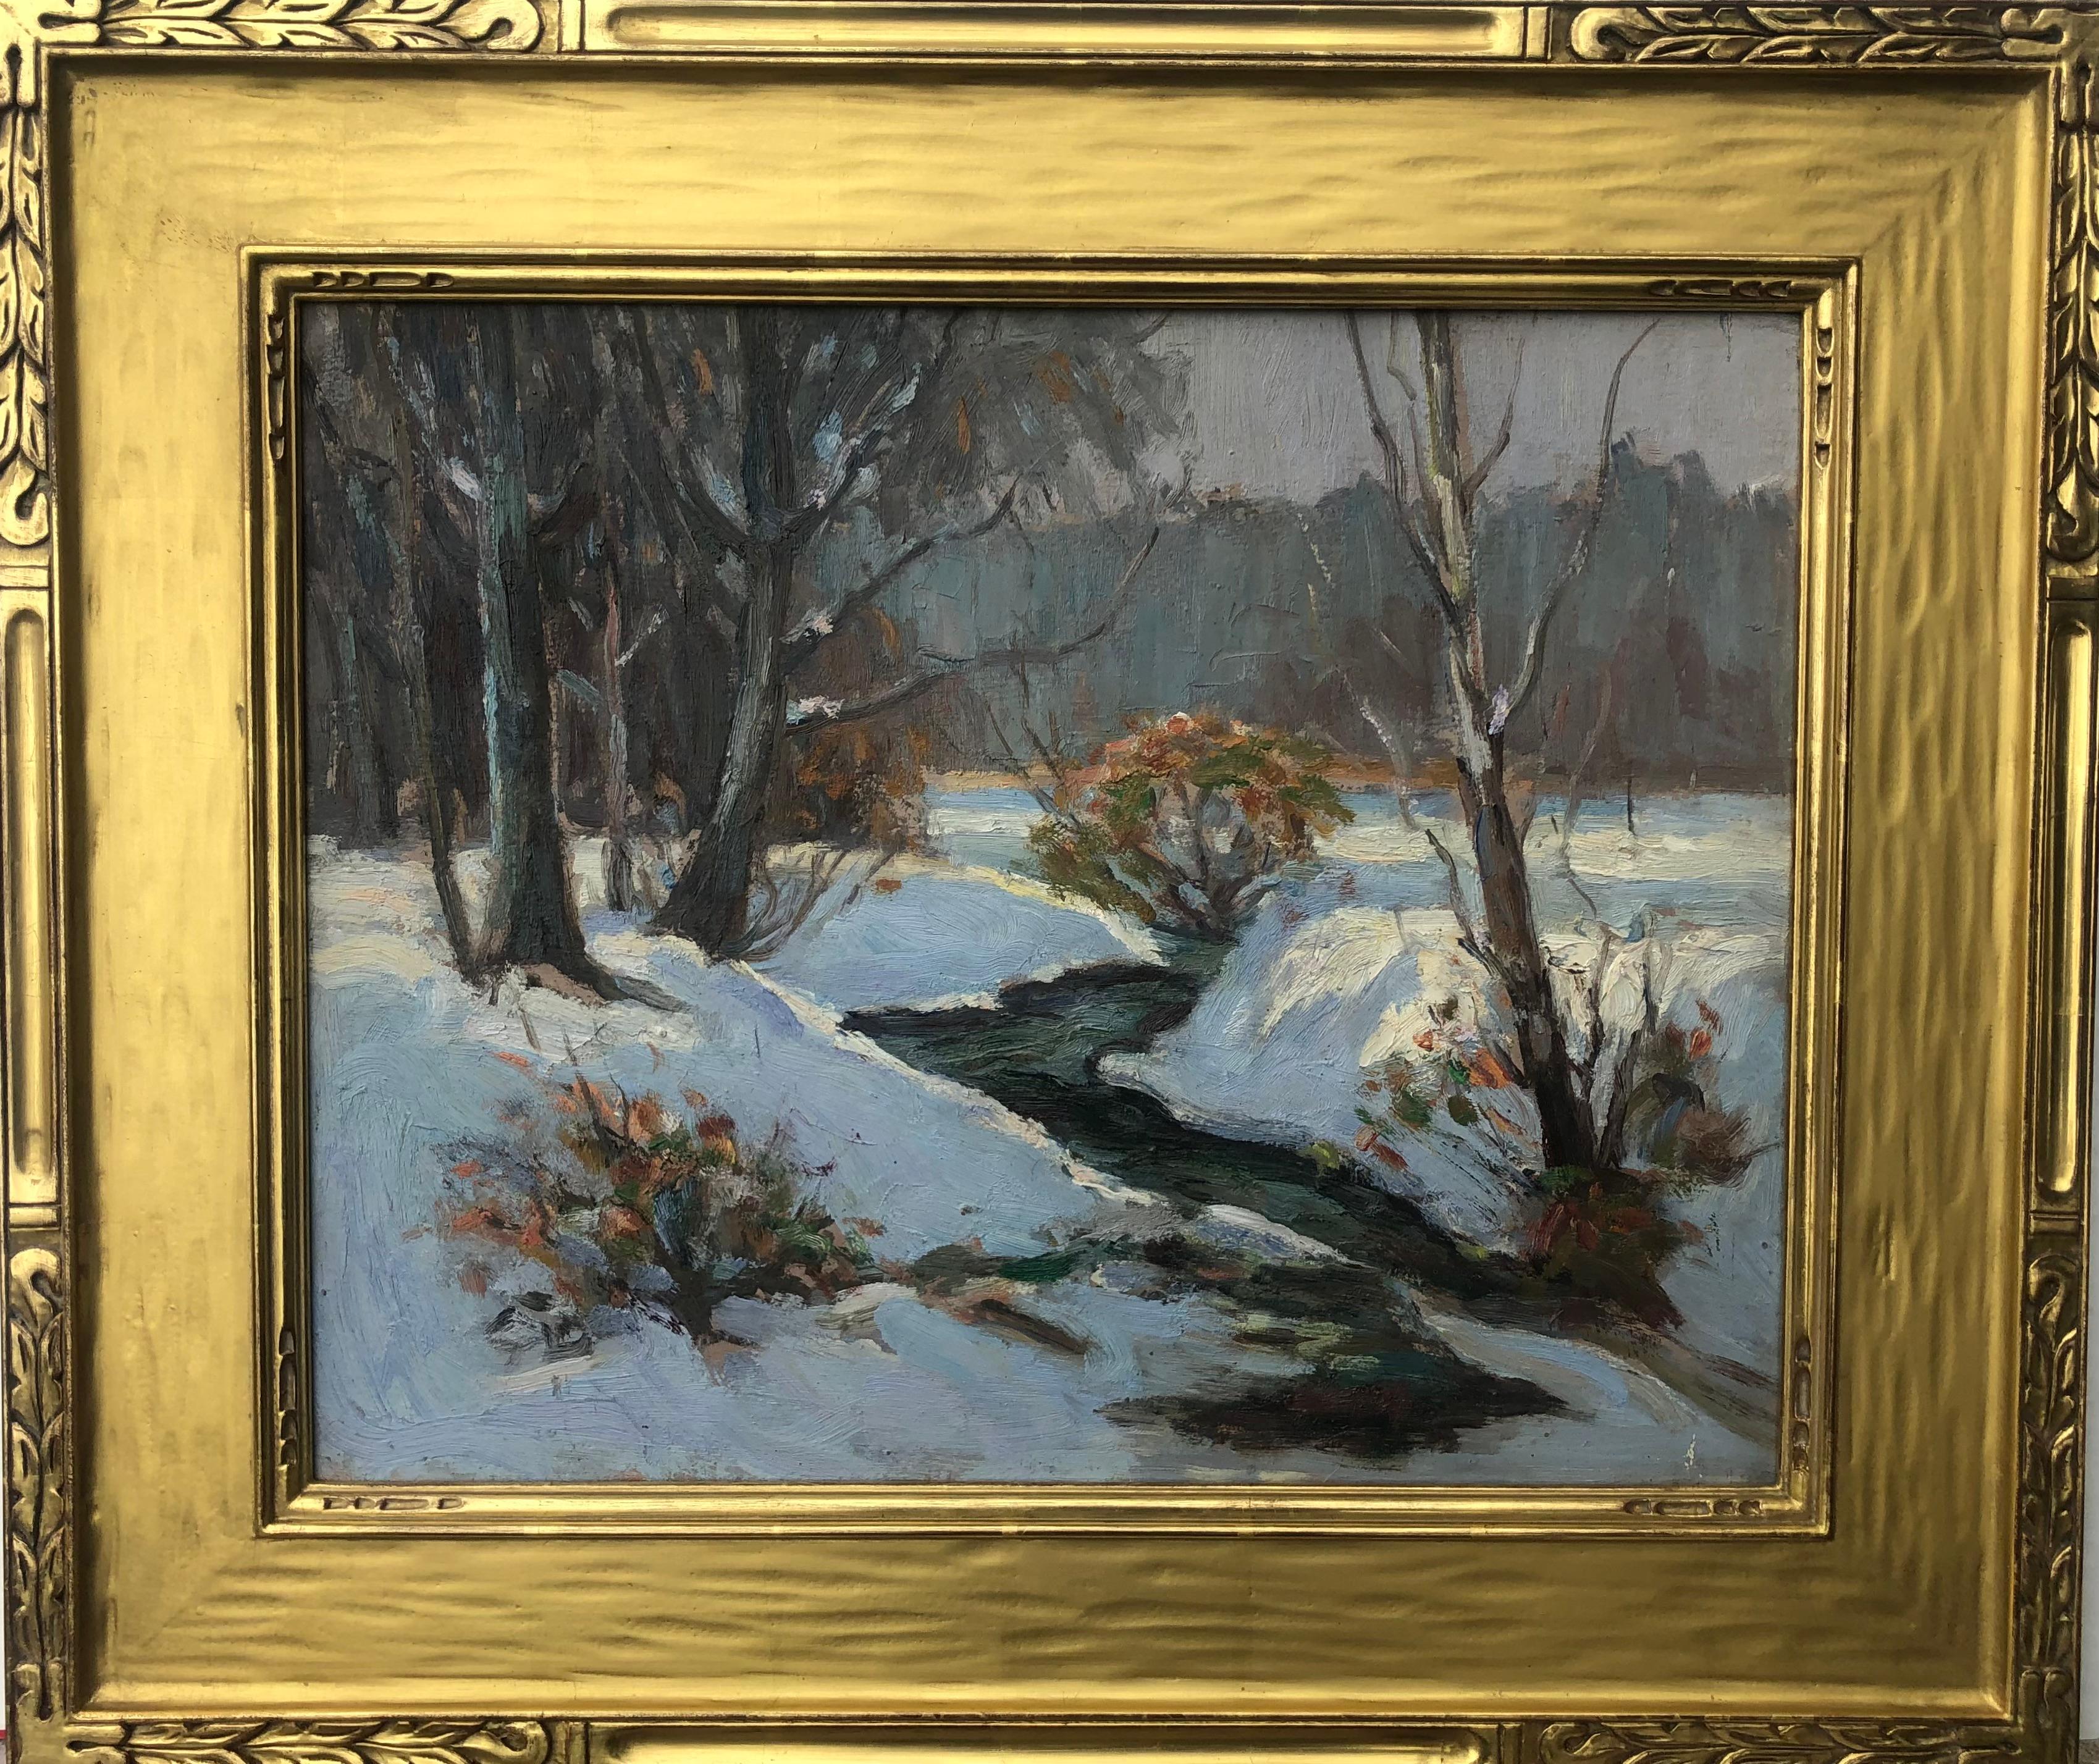 Unknown Landscape Painting - Early 20th Century Bucks County School Snow Scene O/B - in Carved Gold Frame